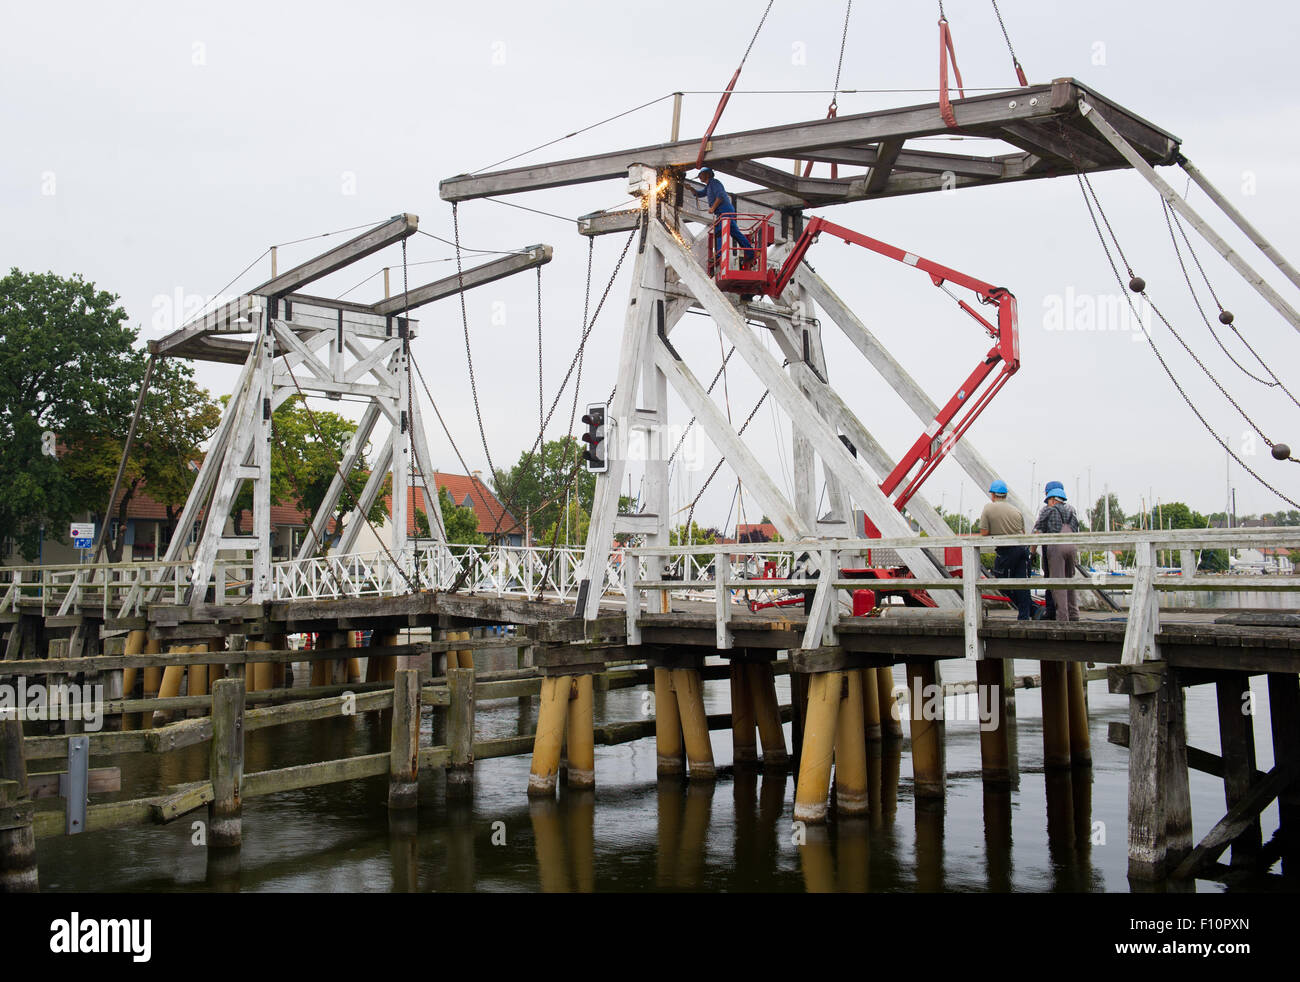 Greifswald-Wieck, Germany. 24th Aug, 2015. A balance beam of the broken bridge 'Klappbruecke' is dismantled by experts in Greifswald-Wieck, Germany, 24 August 2015. Several parts of the 128 year-old wooden bridge need to be rebuild due to fungal infestation. PHOTO: STEFAN SAUER/dpa/Alamy Live News Stock Photo